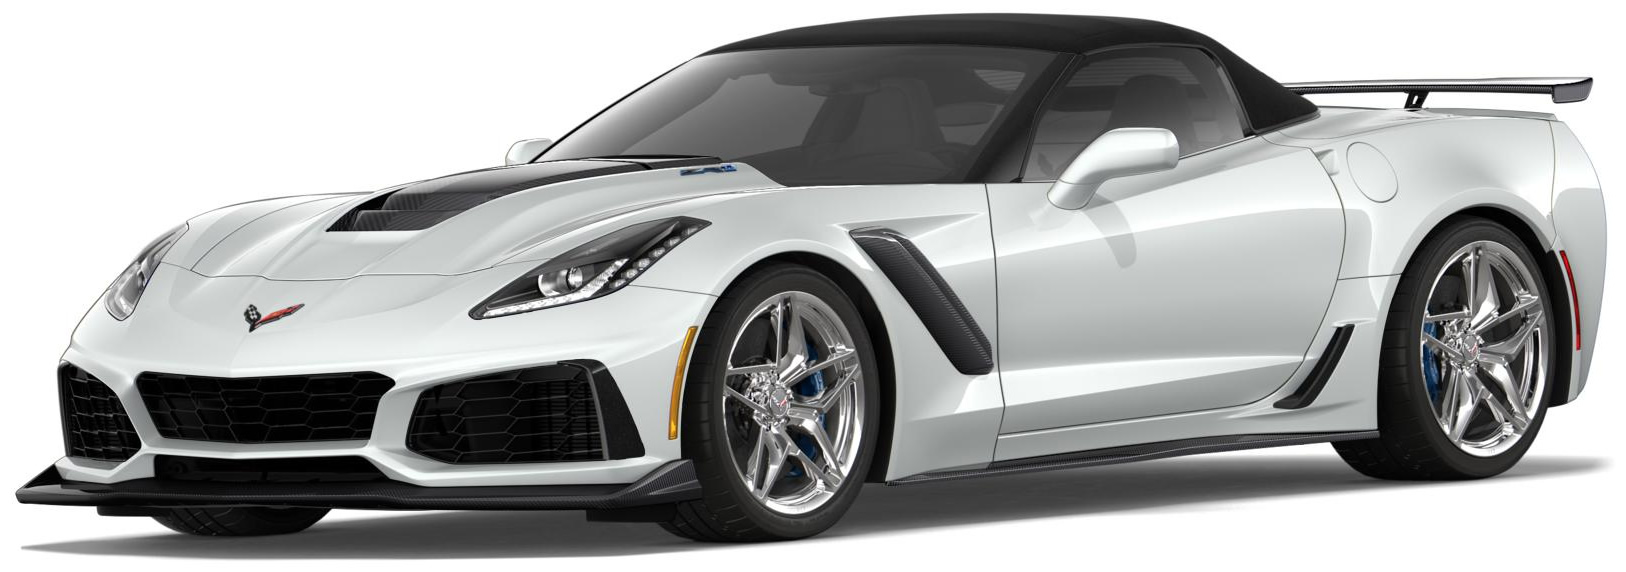 2019 Corvette ZR1 Convertible in Arctic White with Chrome wheels